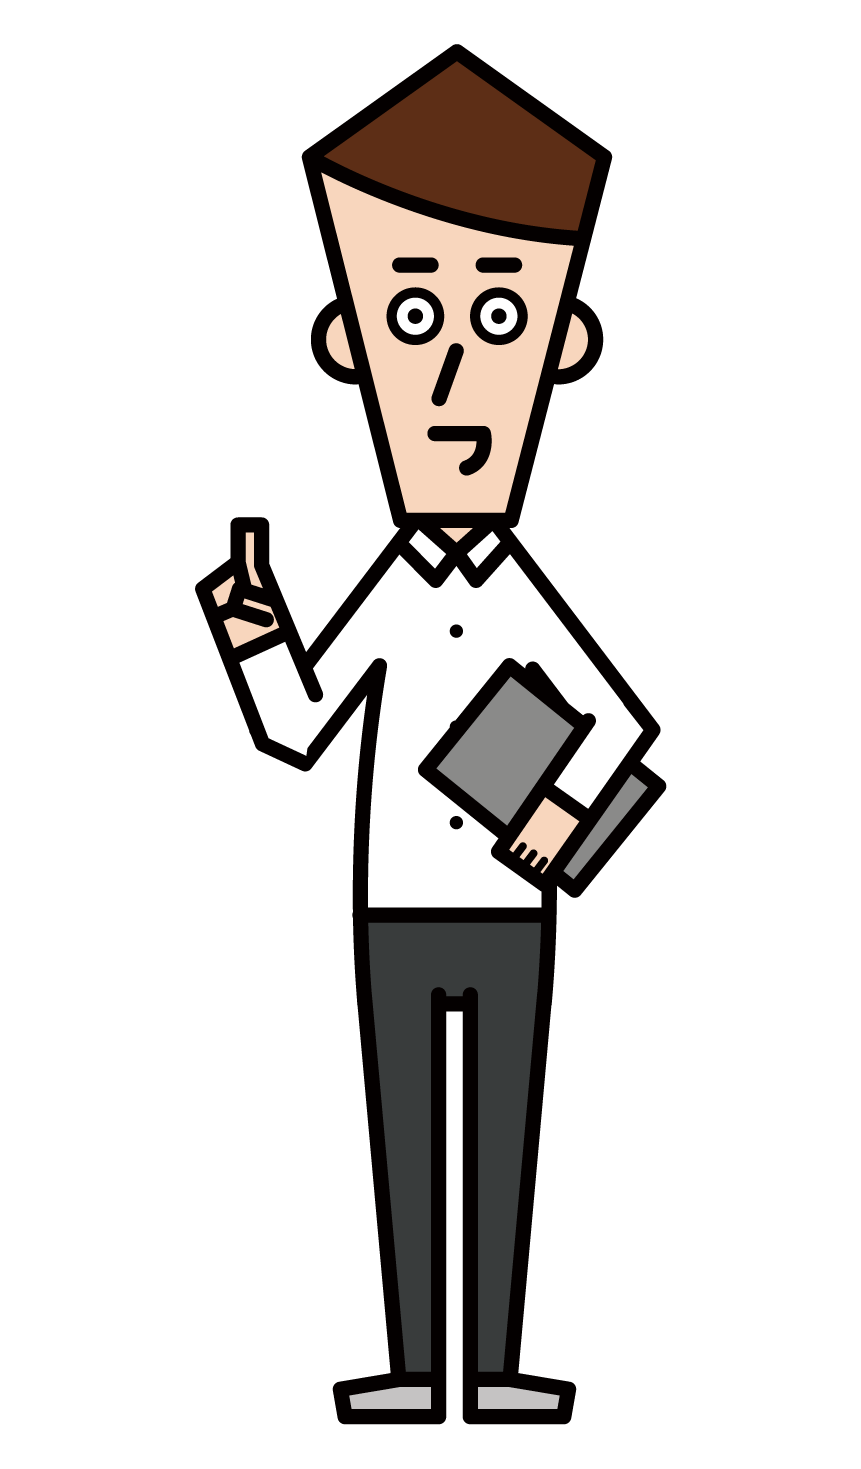 Illustration of a man in plain clothes and office casual